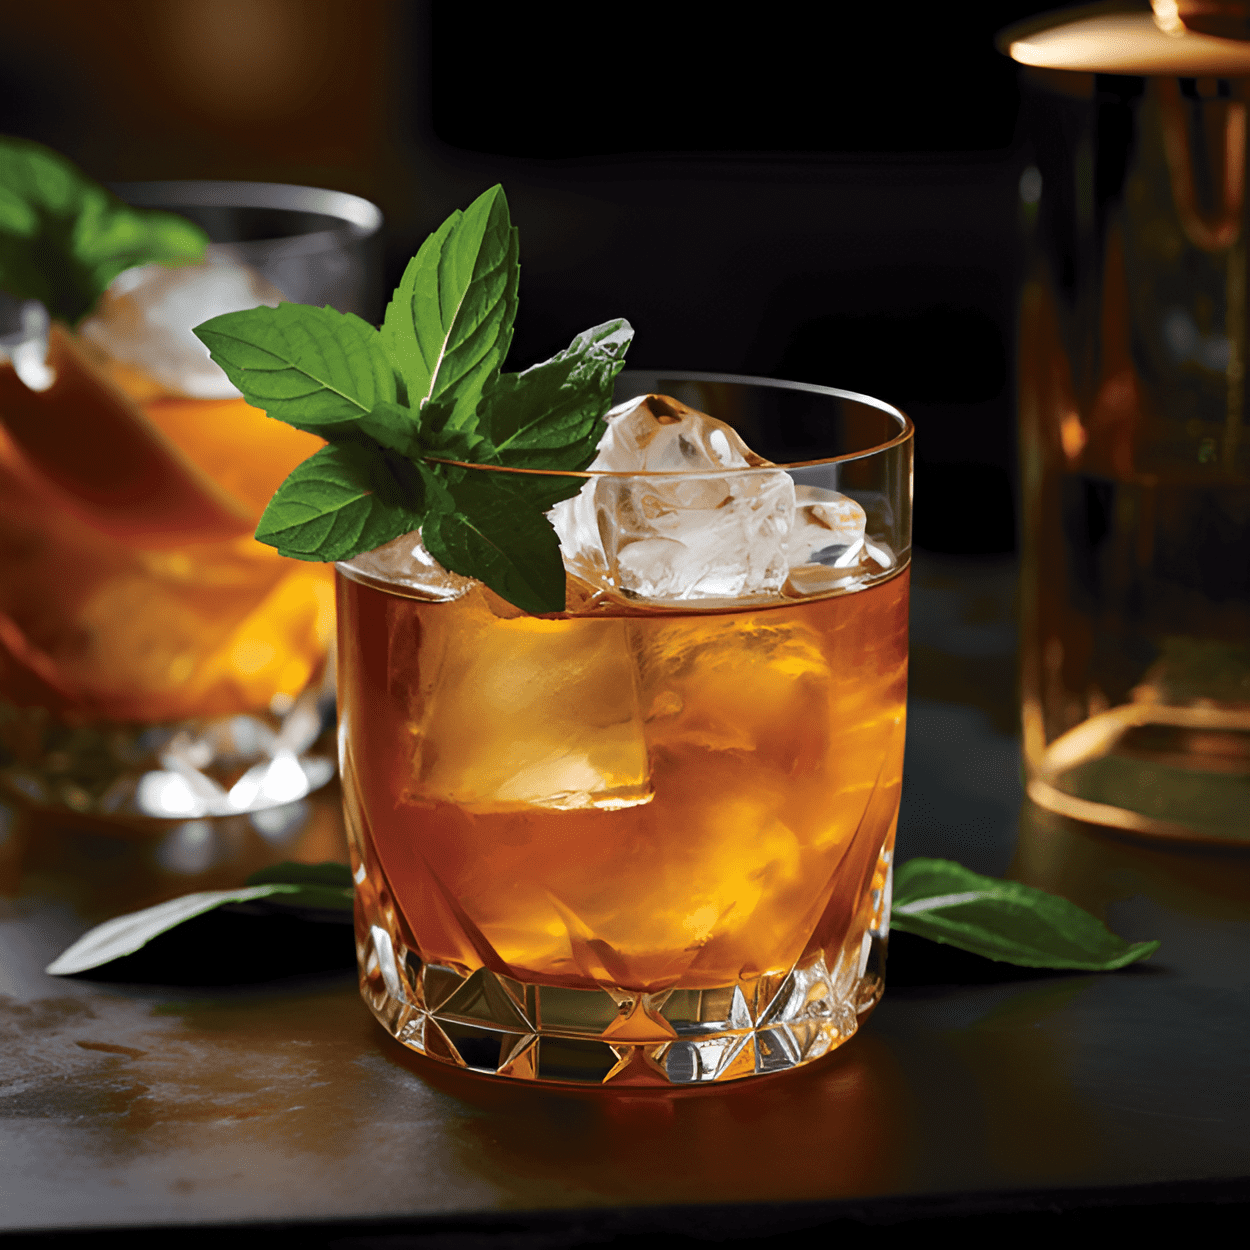 Minty Manhattan Cocktail Recipe - The Minty Manhattan is a robust, full-bodied cocktail with a strong whiskey base. The sweet vermouth adds a touch of sweetness, while the mint leaves lend a refreshing, cool aftertaste. The bitters round out the flavors, adding depth and complexity.